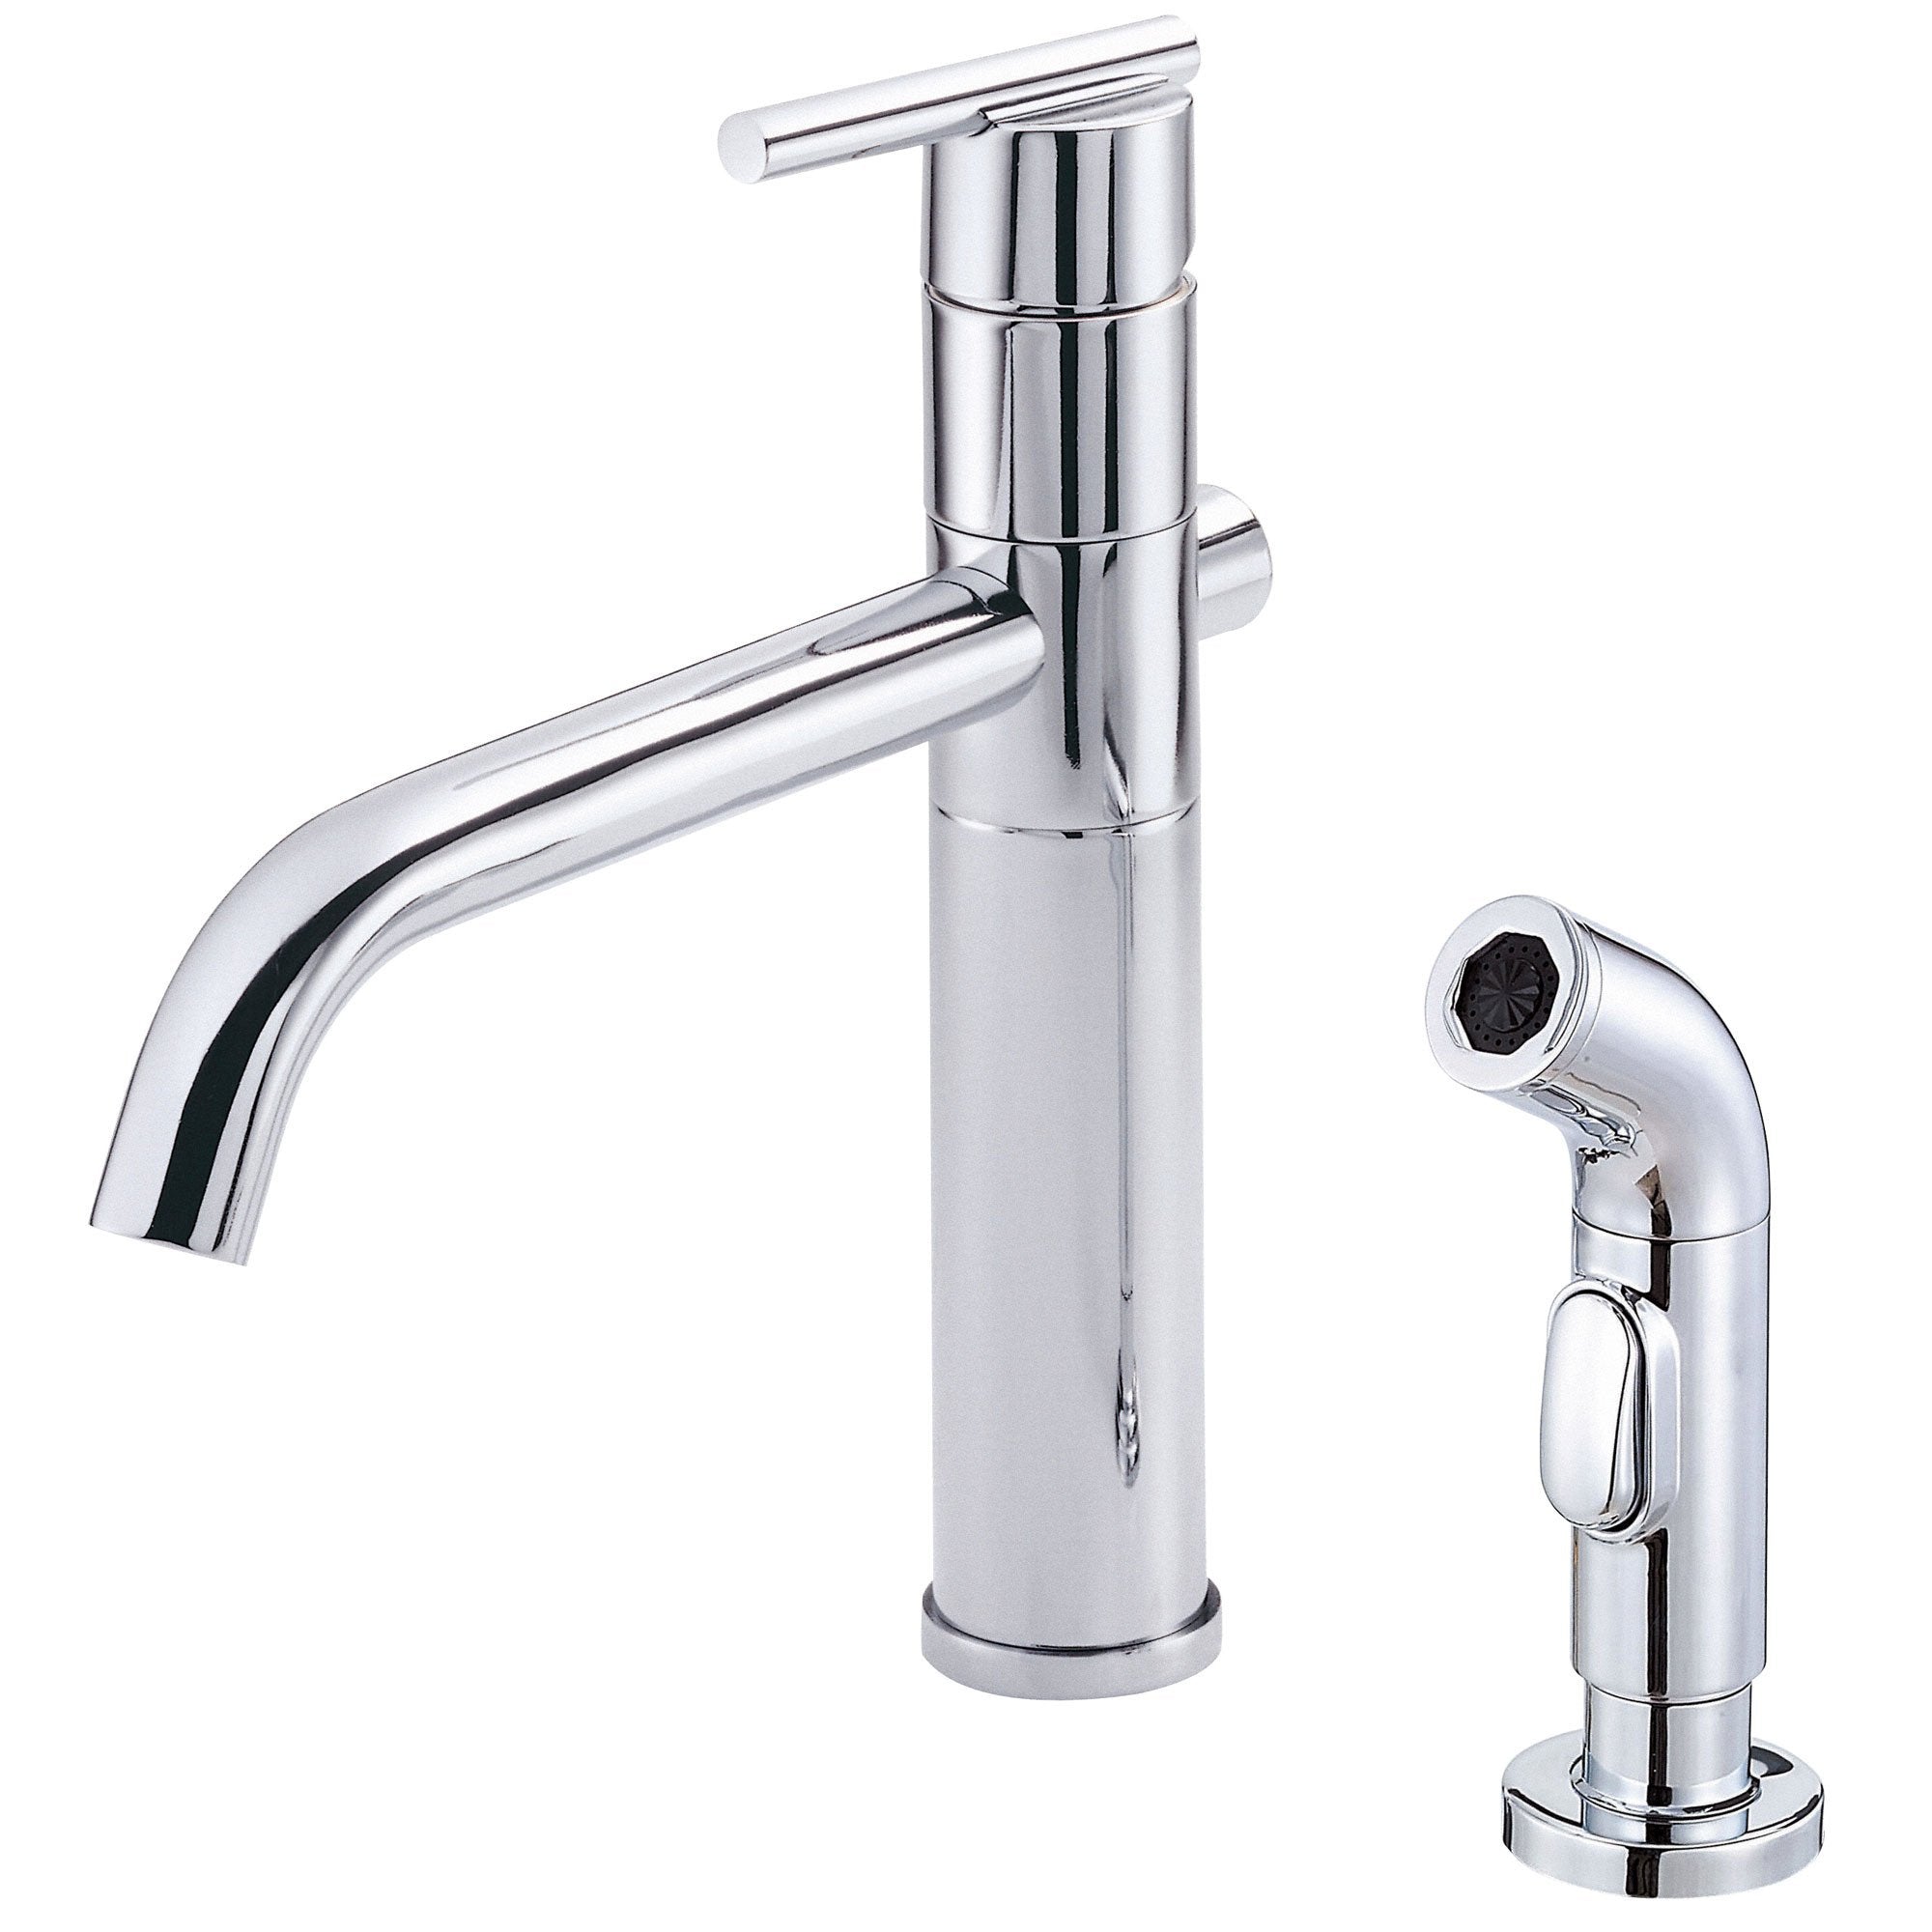 Danze Parma Chrome Cylindrical Single Handle Modern Kitchen Faucet with Sprayer